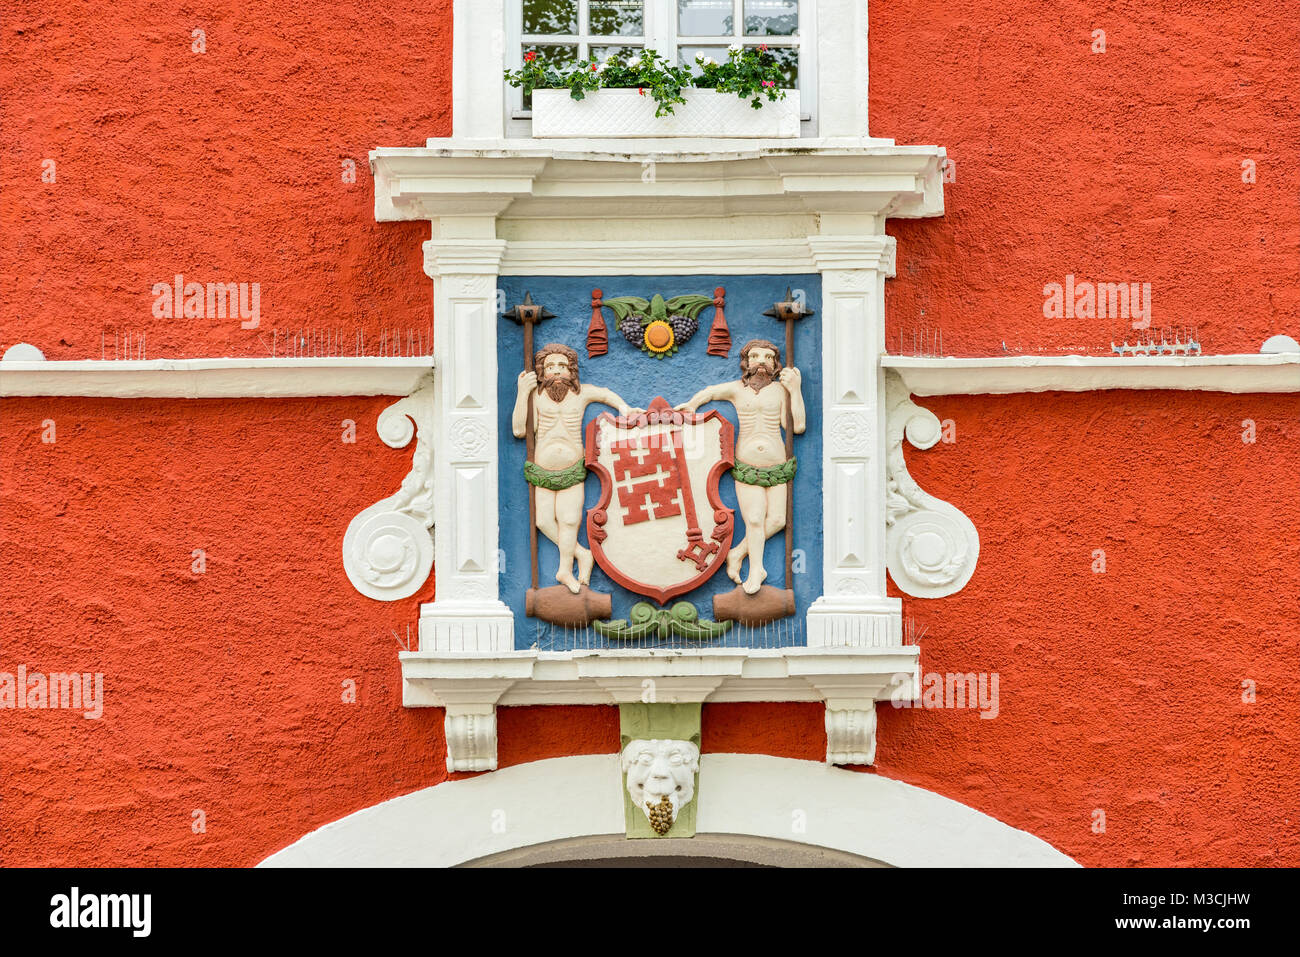 City coat of arms at facade of Rathaus (Town Hall) in Soest, Ostwestfalen Region, North Rhine-Westphalia, Germany Stock Photo